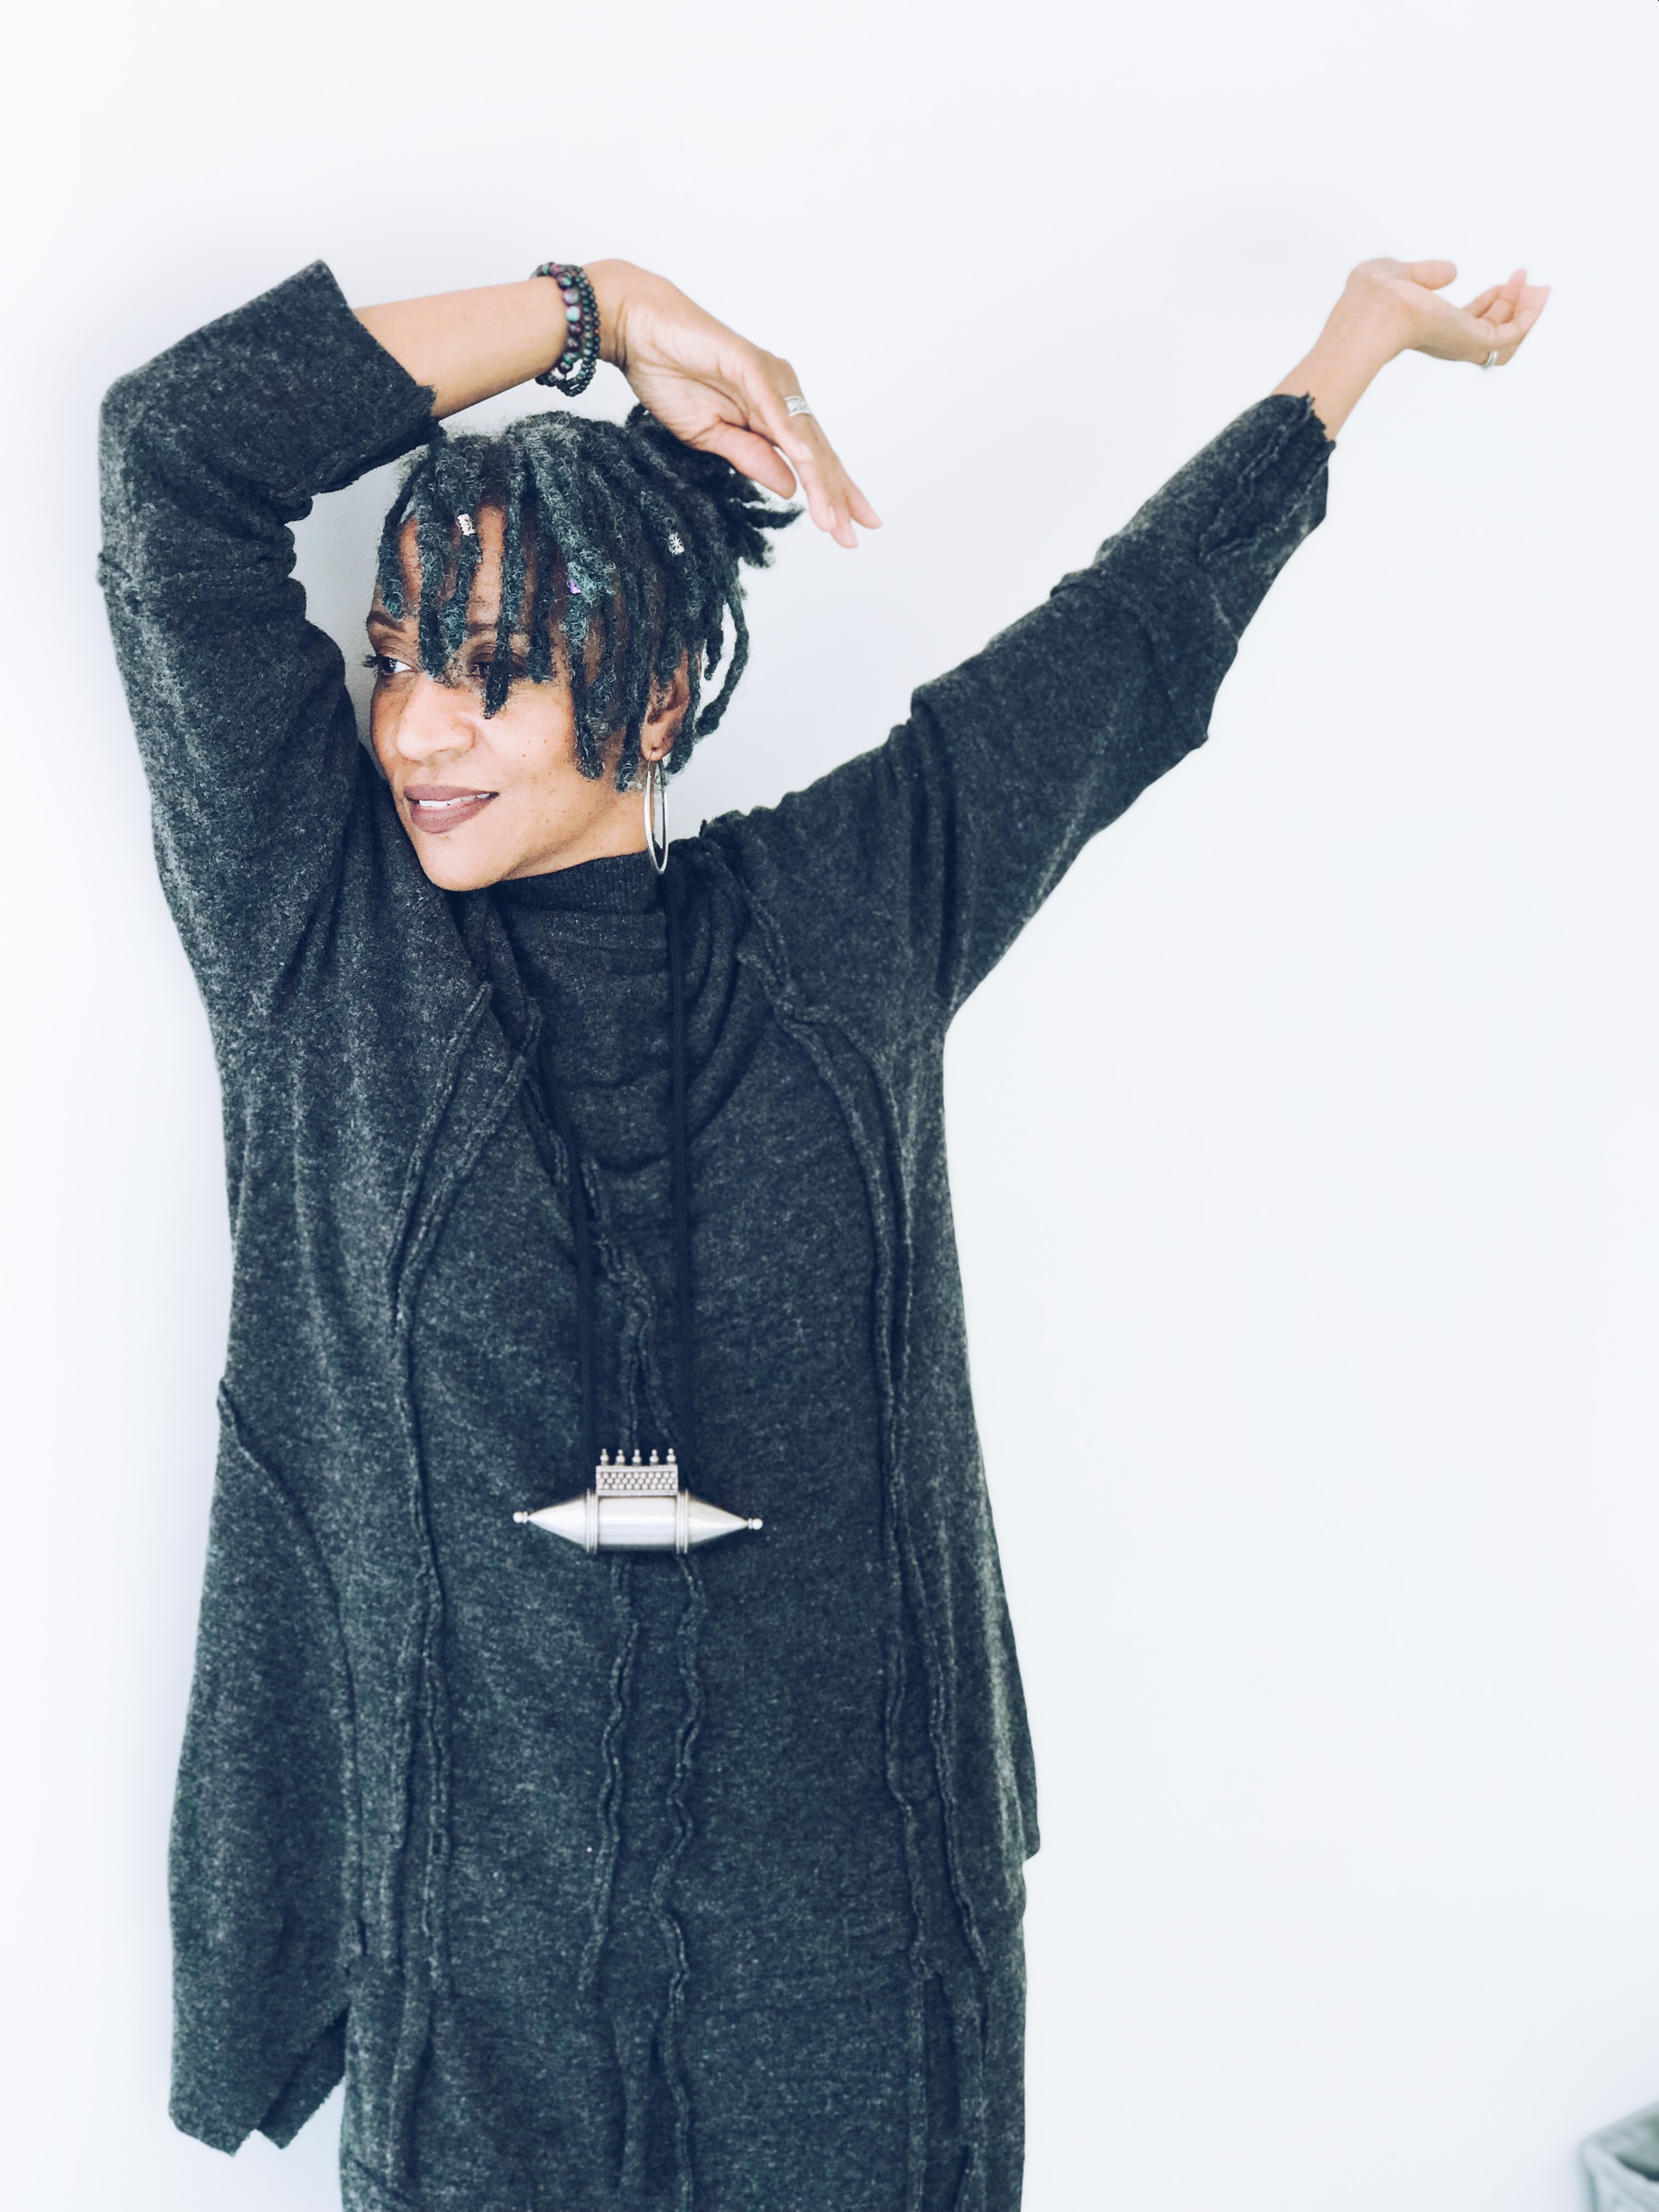 A Black woman with short locs falling over her eyes raises her hands above her head as if in joyful relaxation. She wears a long gray sweater and poses in front of a white wall.